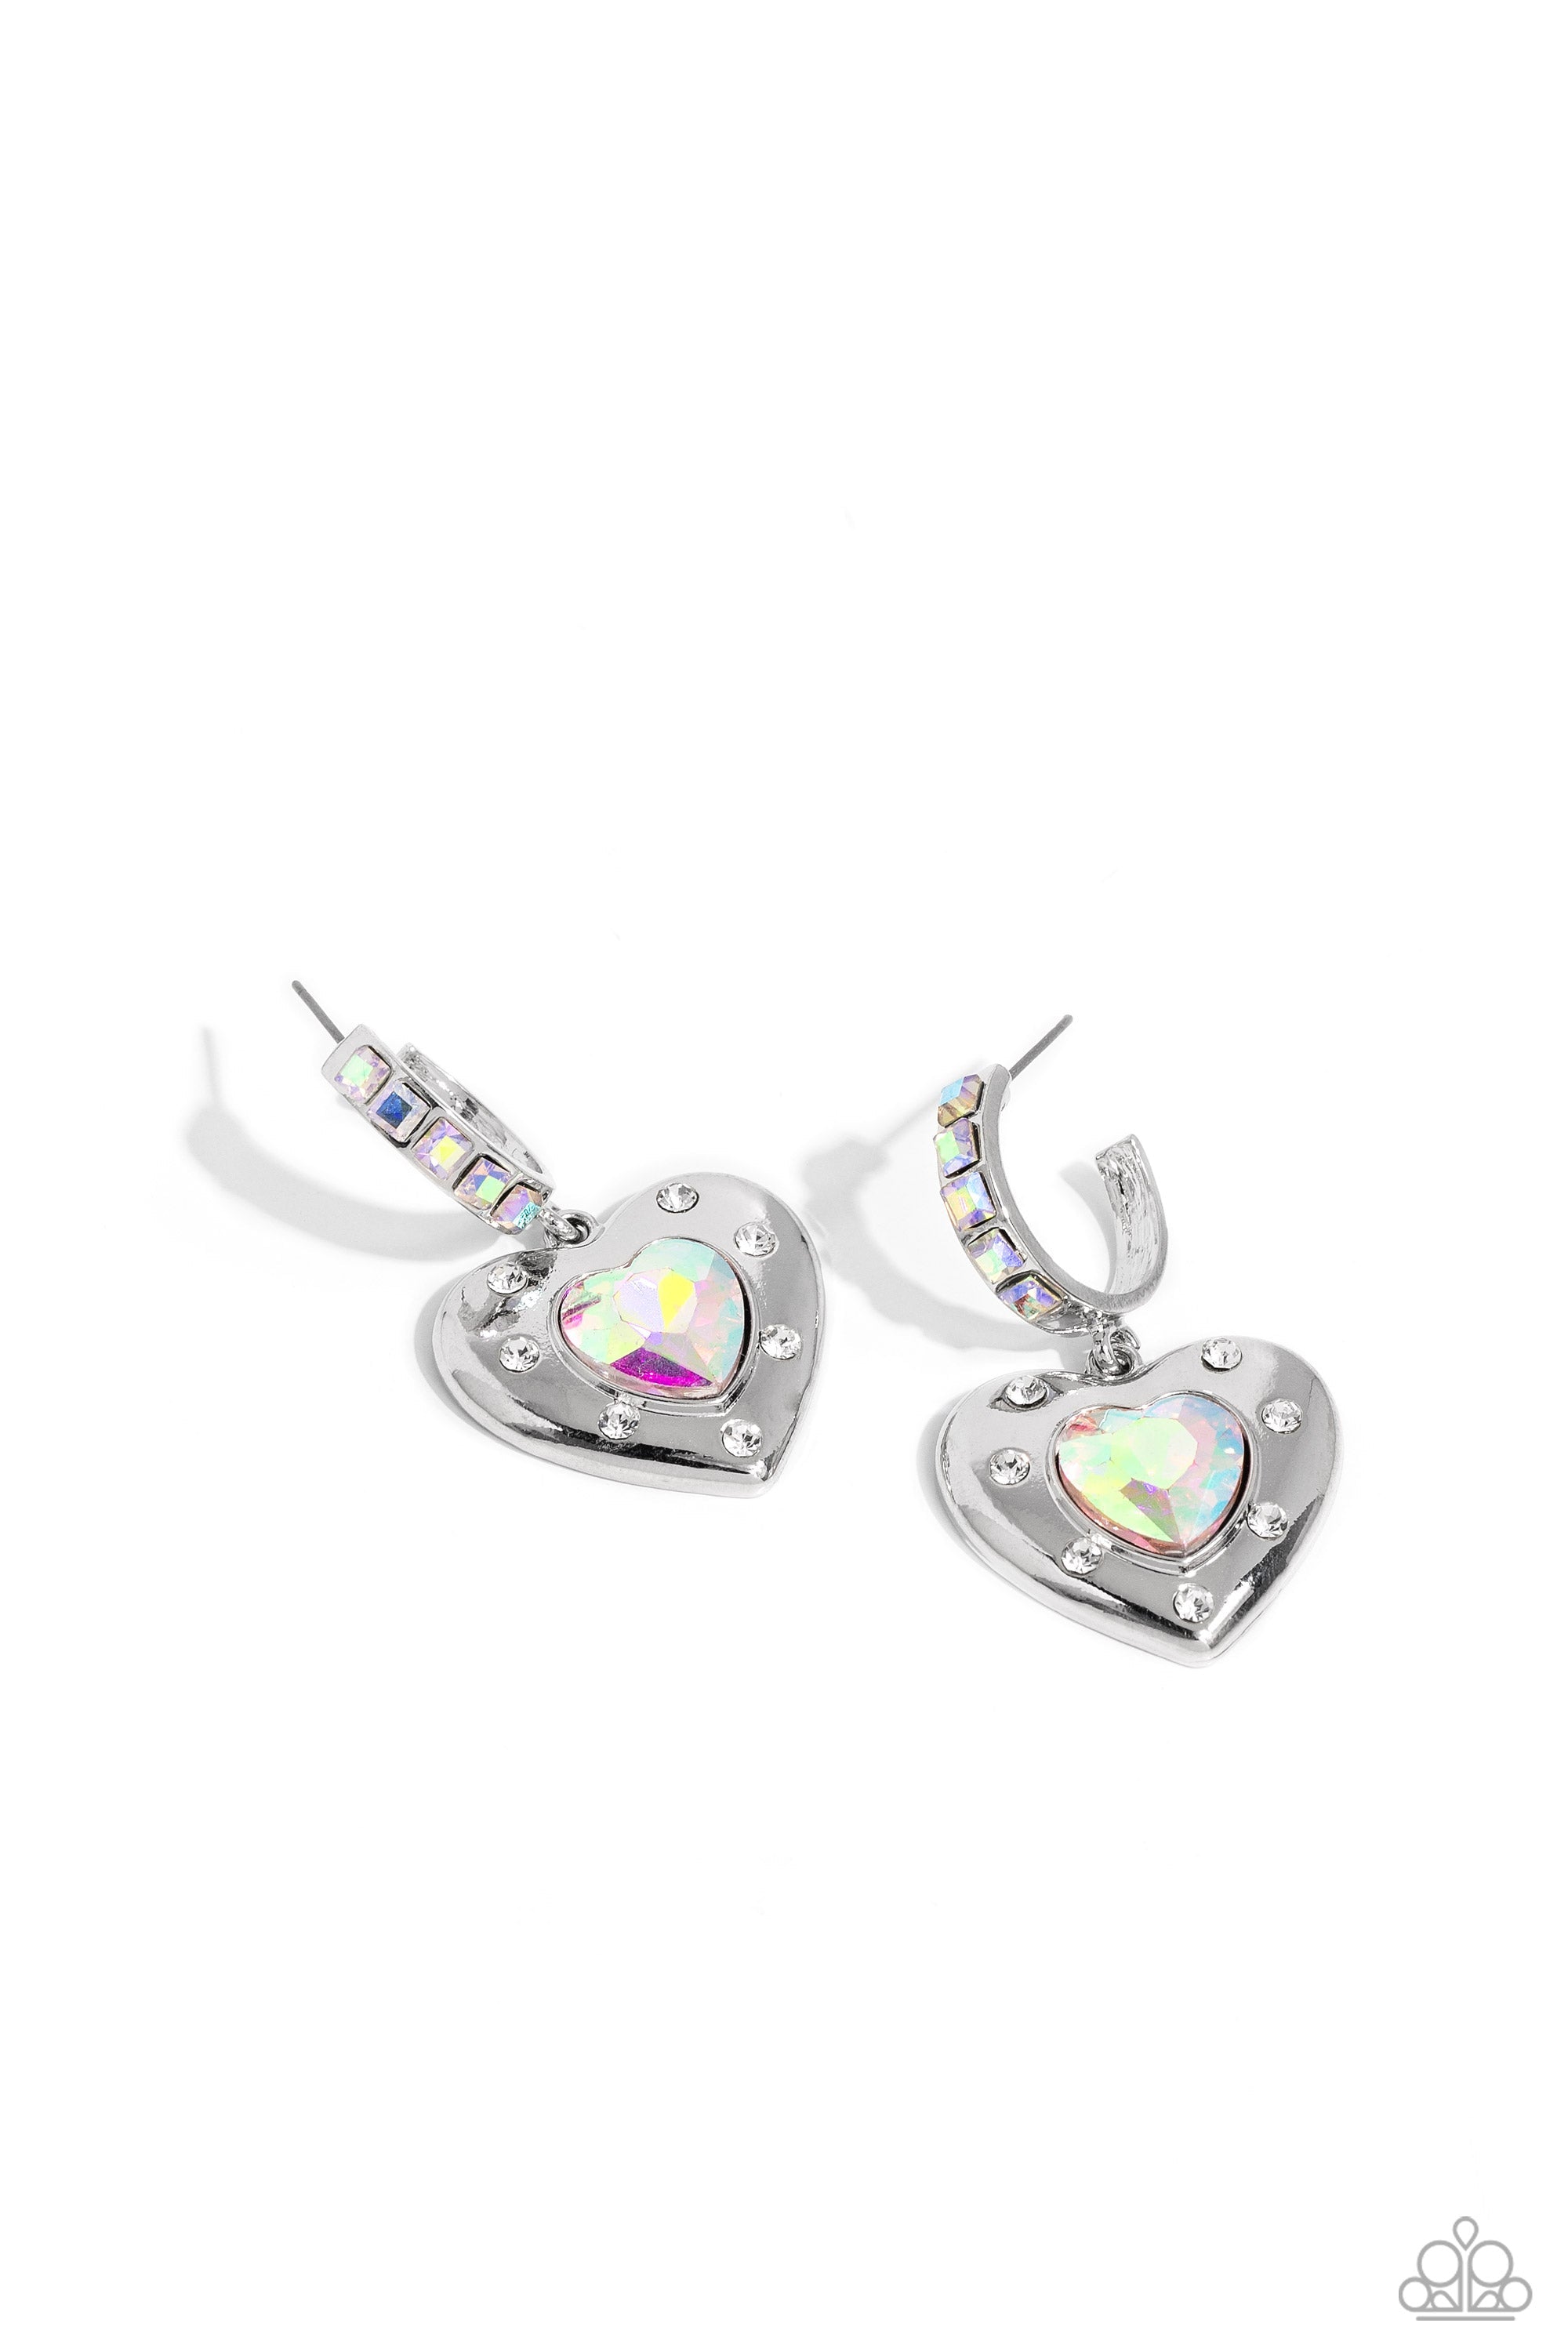 We Are Young White & Iridescent Rhinestone Heart Hoop Earrings - Paparazzi Accessories- lightbox - CarasShop.com - $5 Jewelry by Cara Jewels